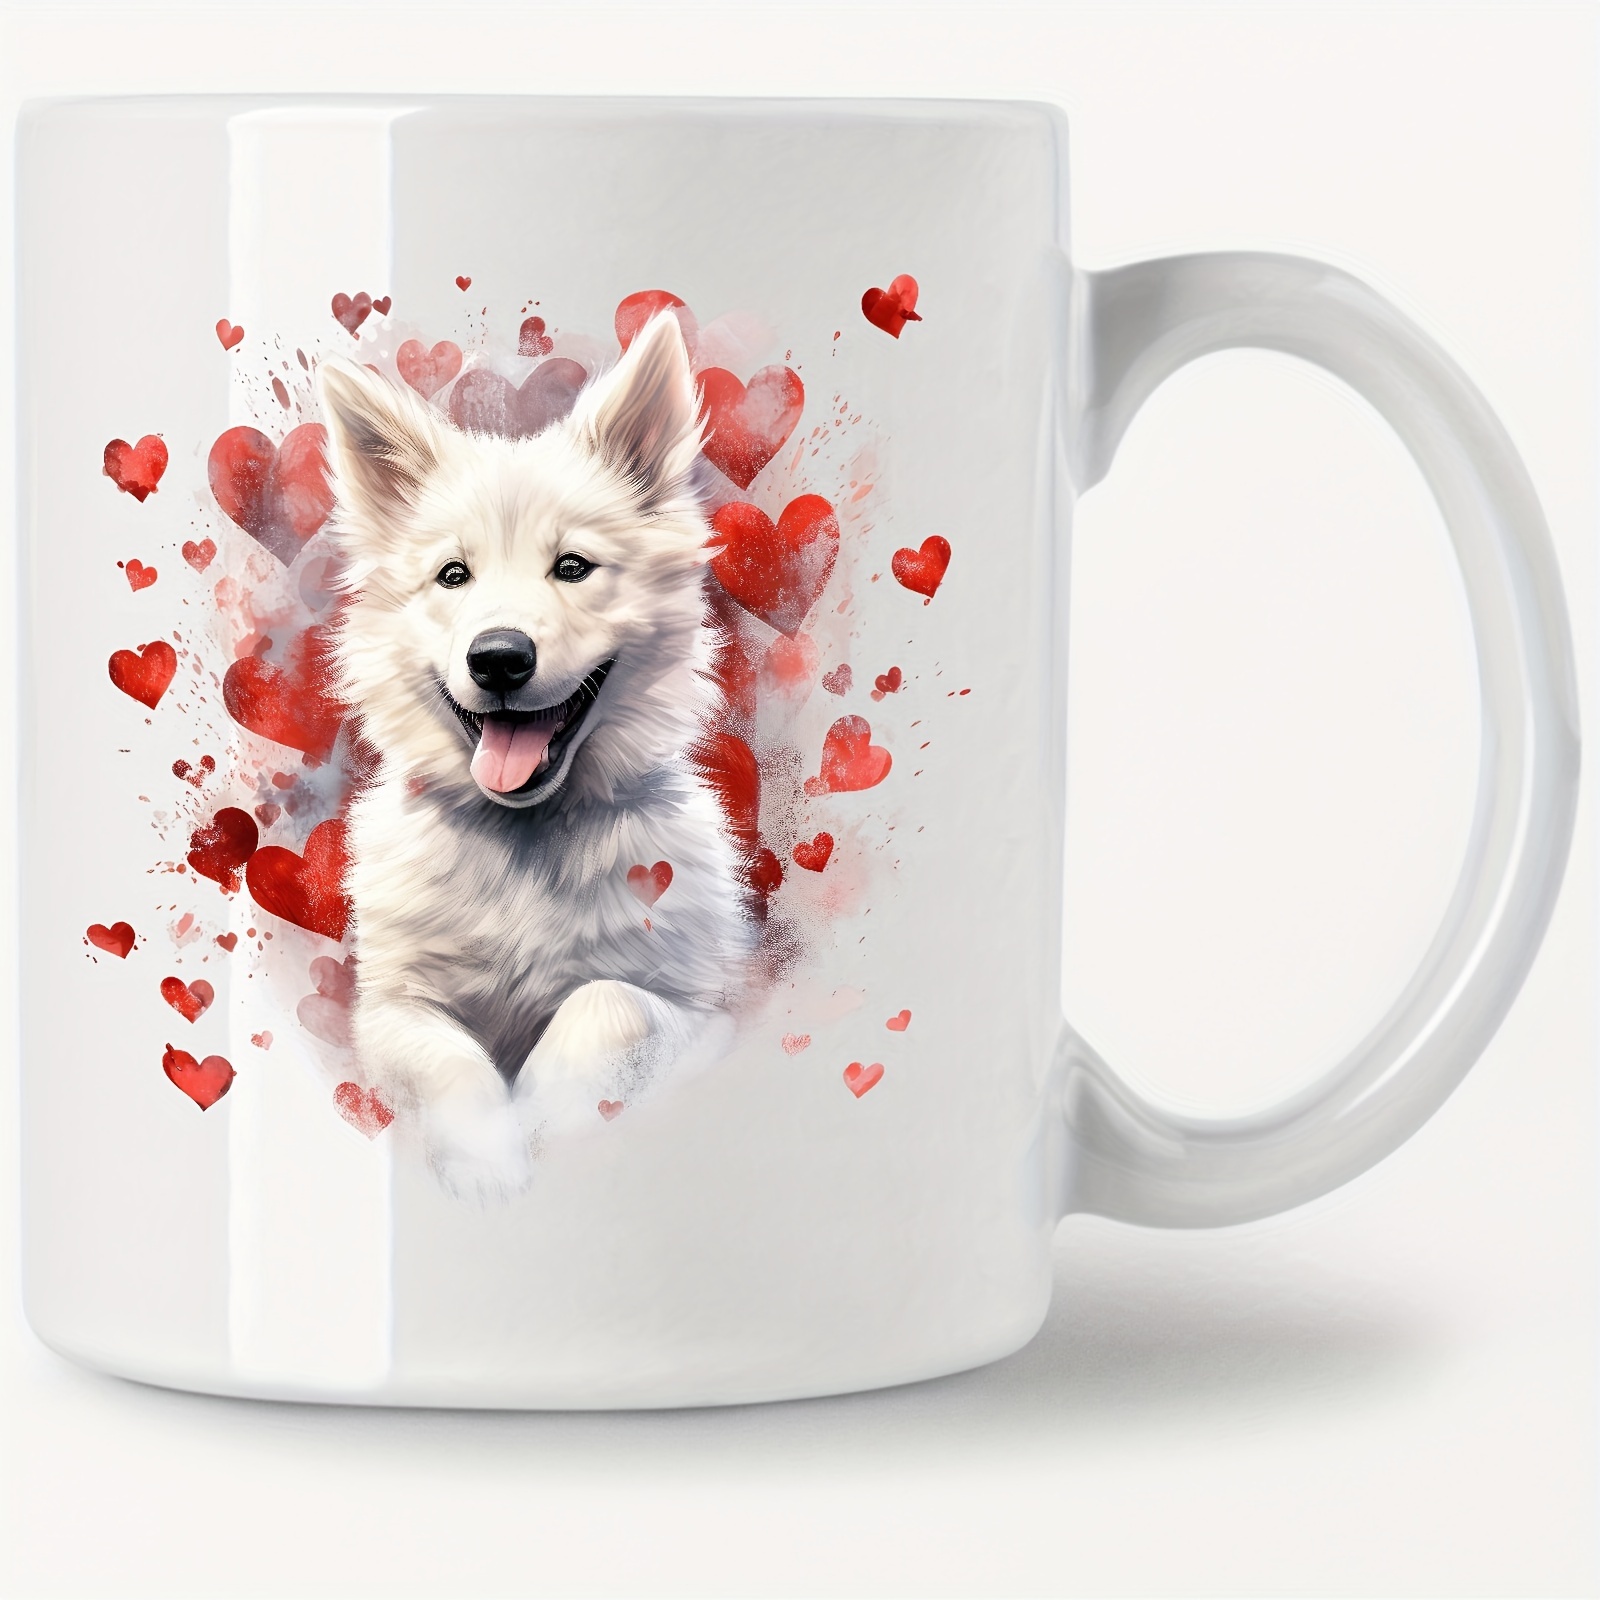 

11oz White Ceramic Coffee Mug With Heart-warming White Shepherd Puppy Design, Dishwasher & Microwave Safe, Perfect Gift For Pet Lovers, Family, And Friends - Set Of 1